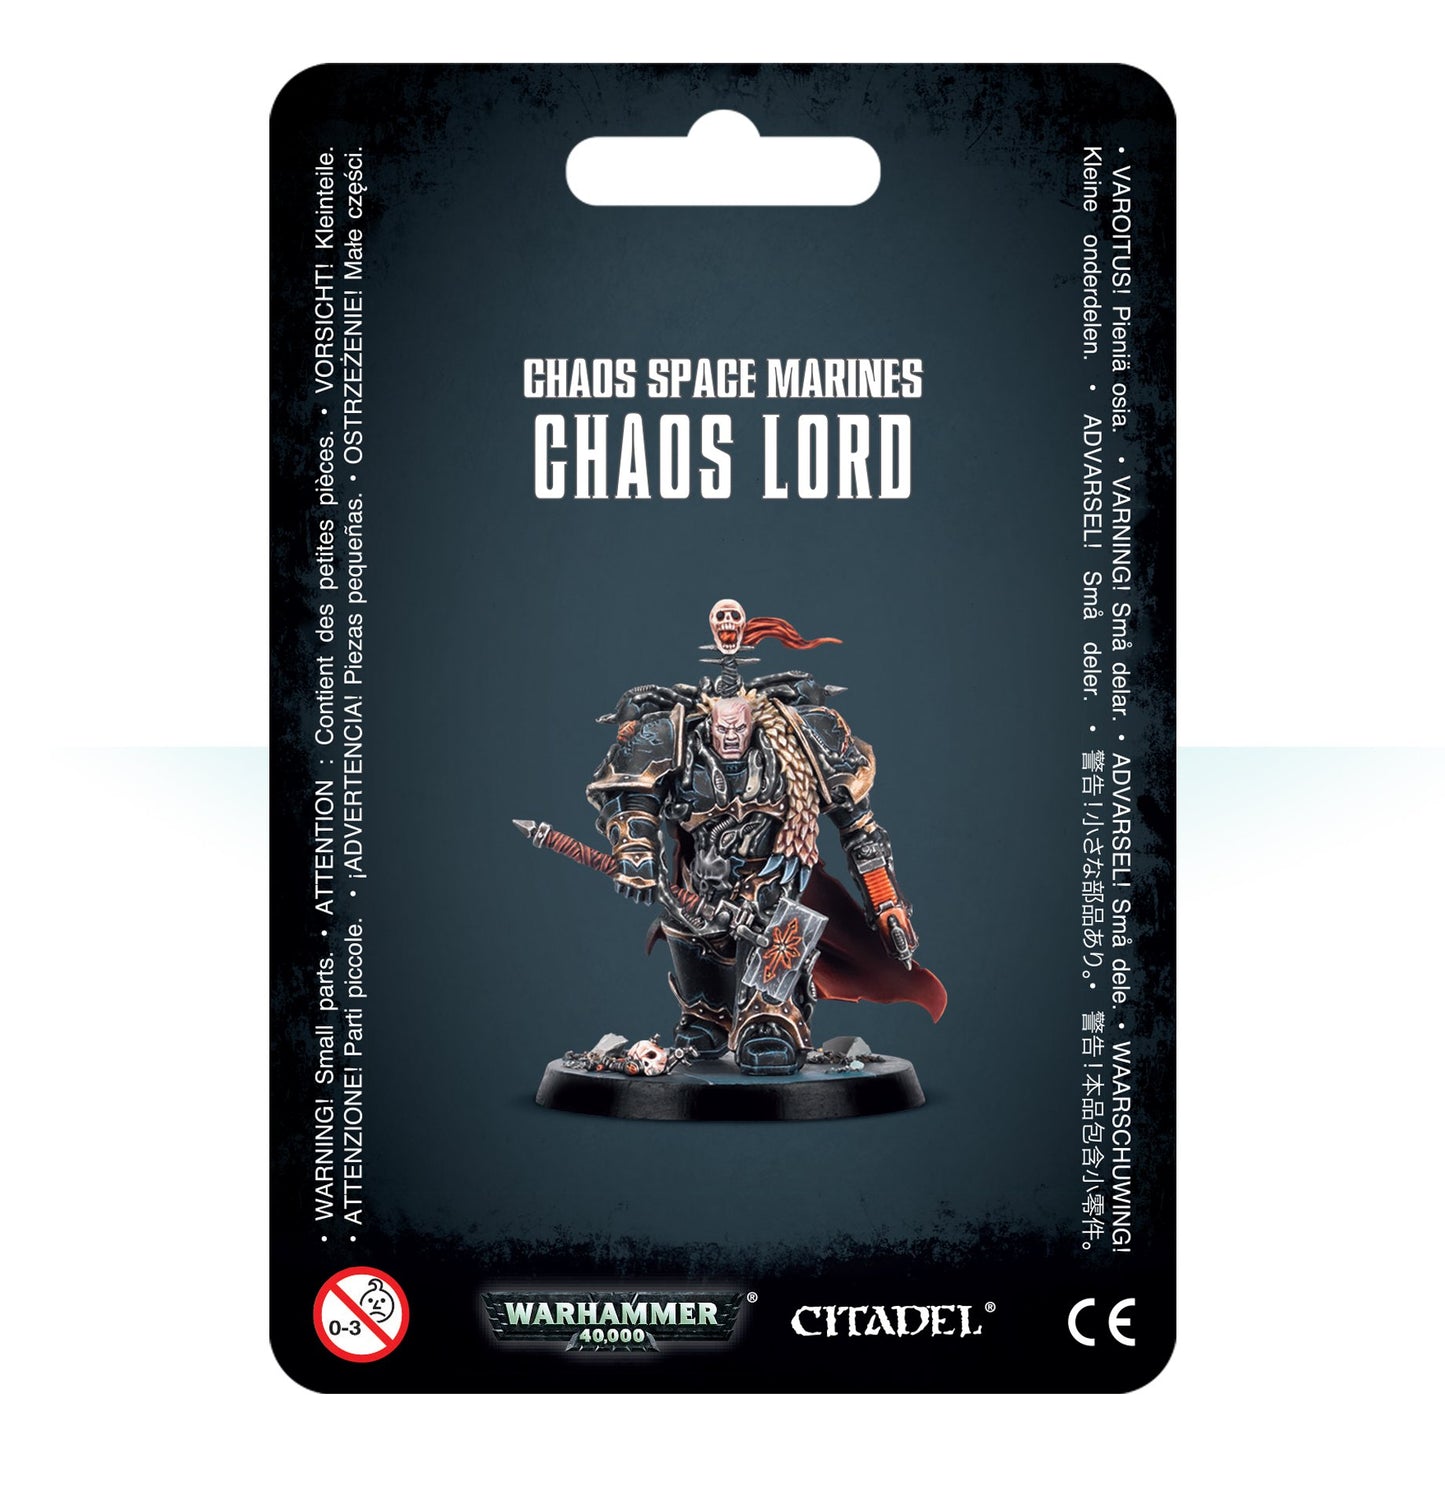 Chaos Space Marines: Chaos Lord